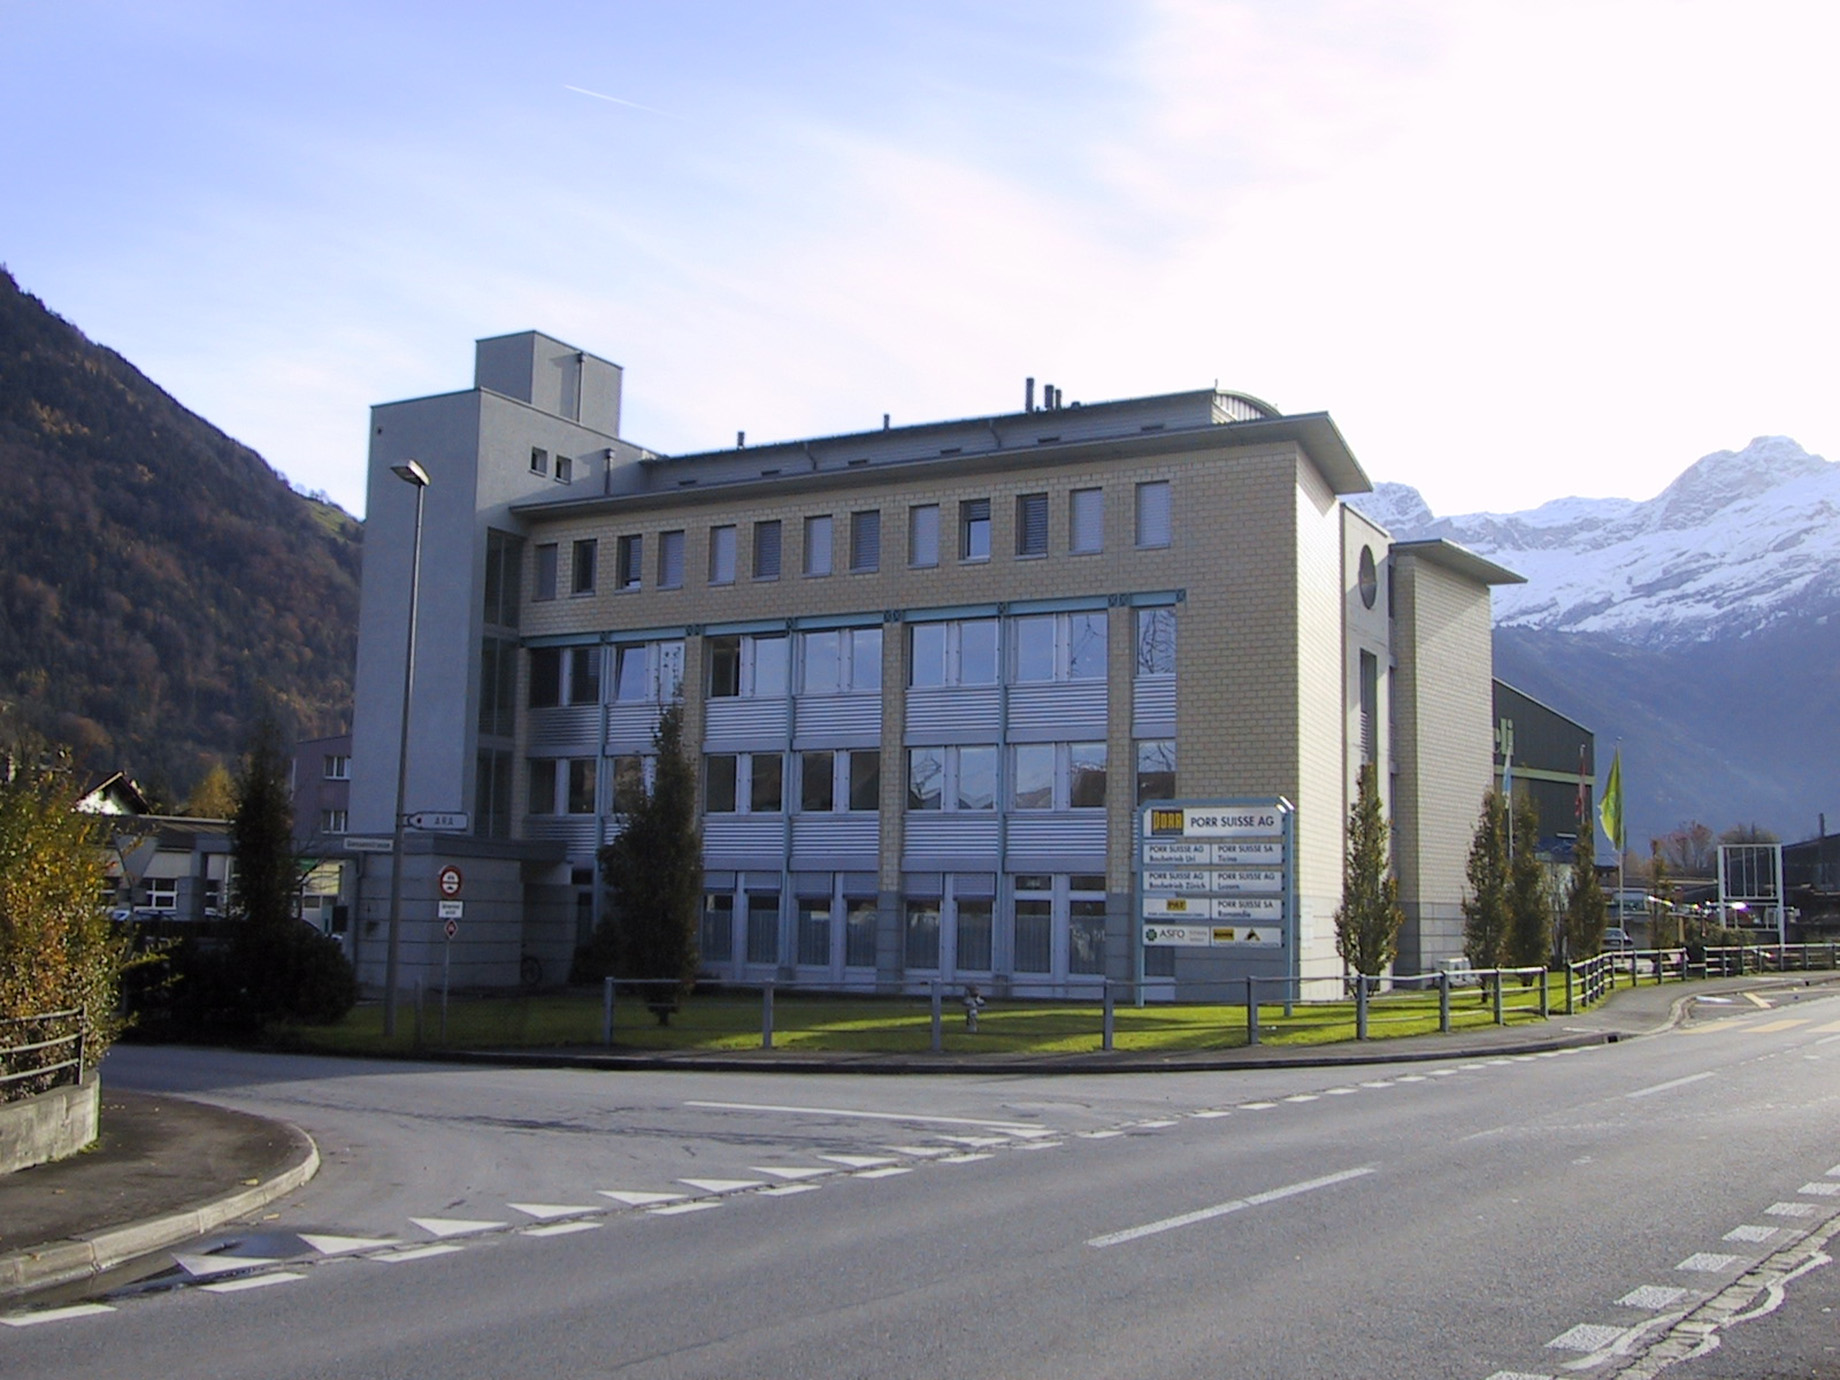 Photo: modern office building in front of snow-capped mountain landscape